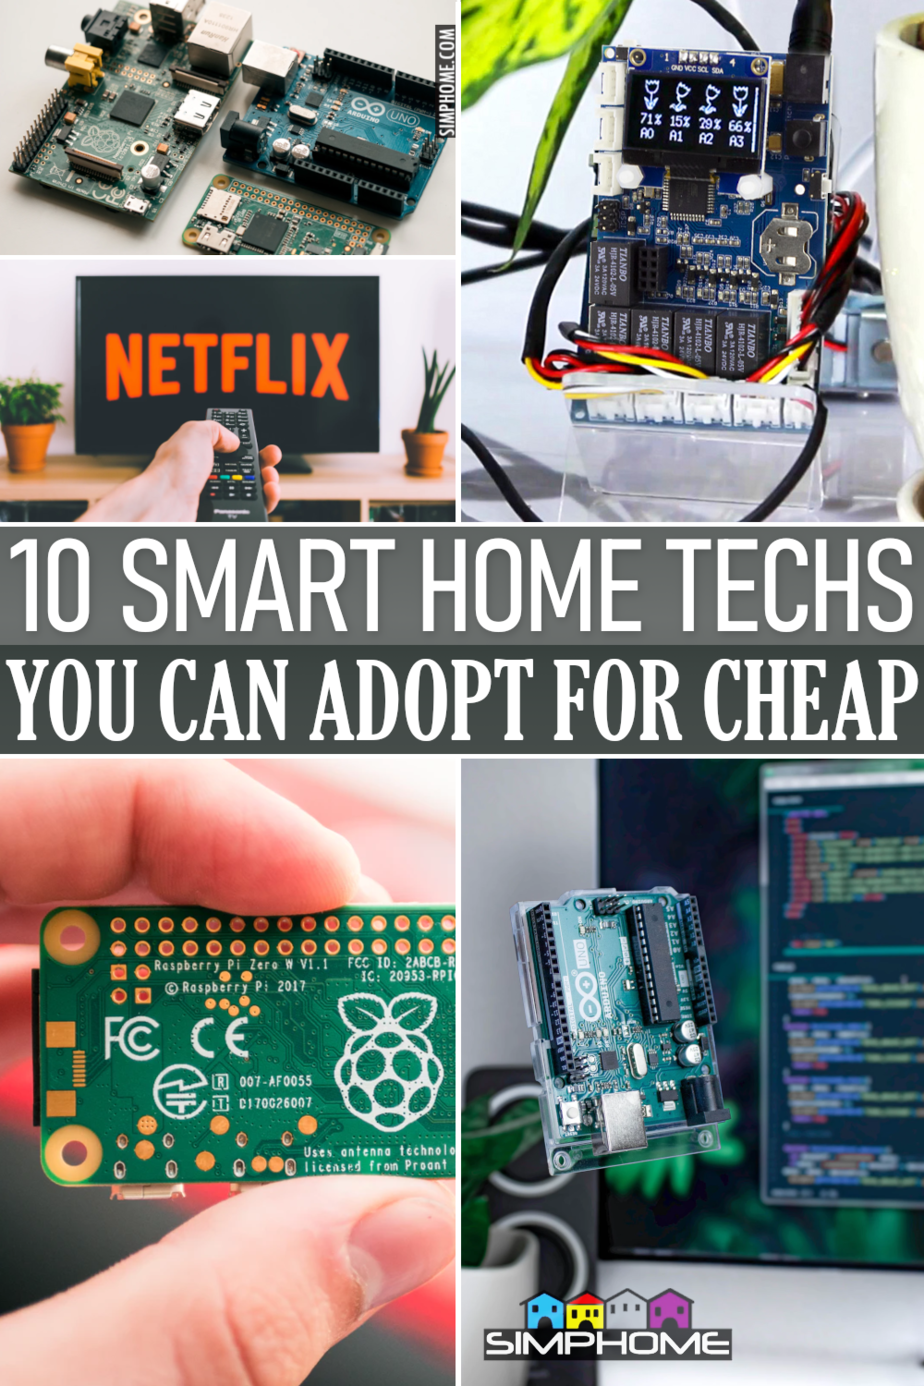 10 Smart Home Technologies You can Adopt for Cheap via Simphome.comFeatured